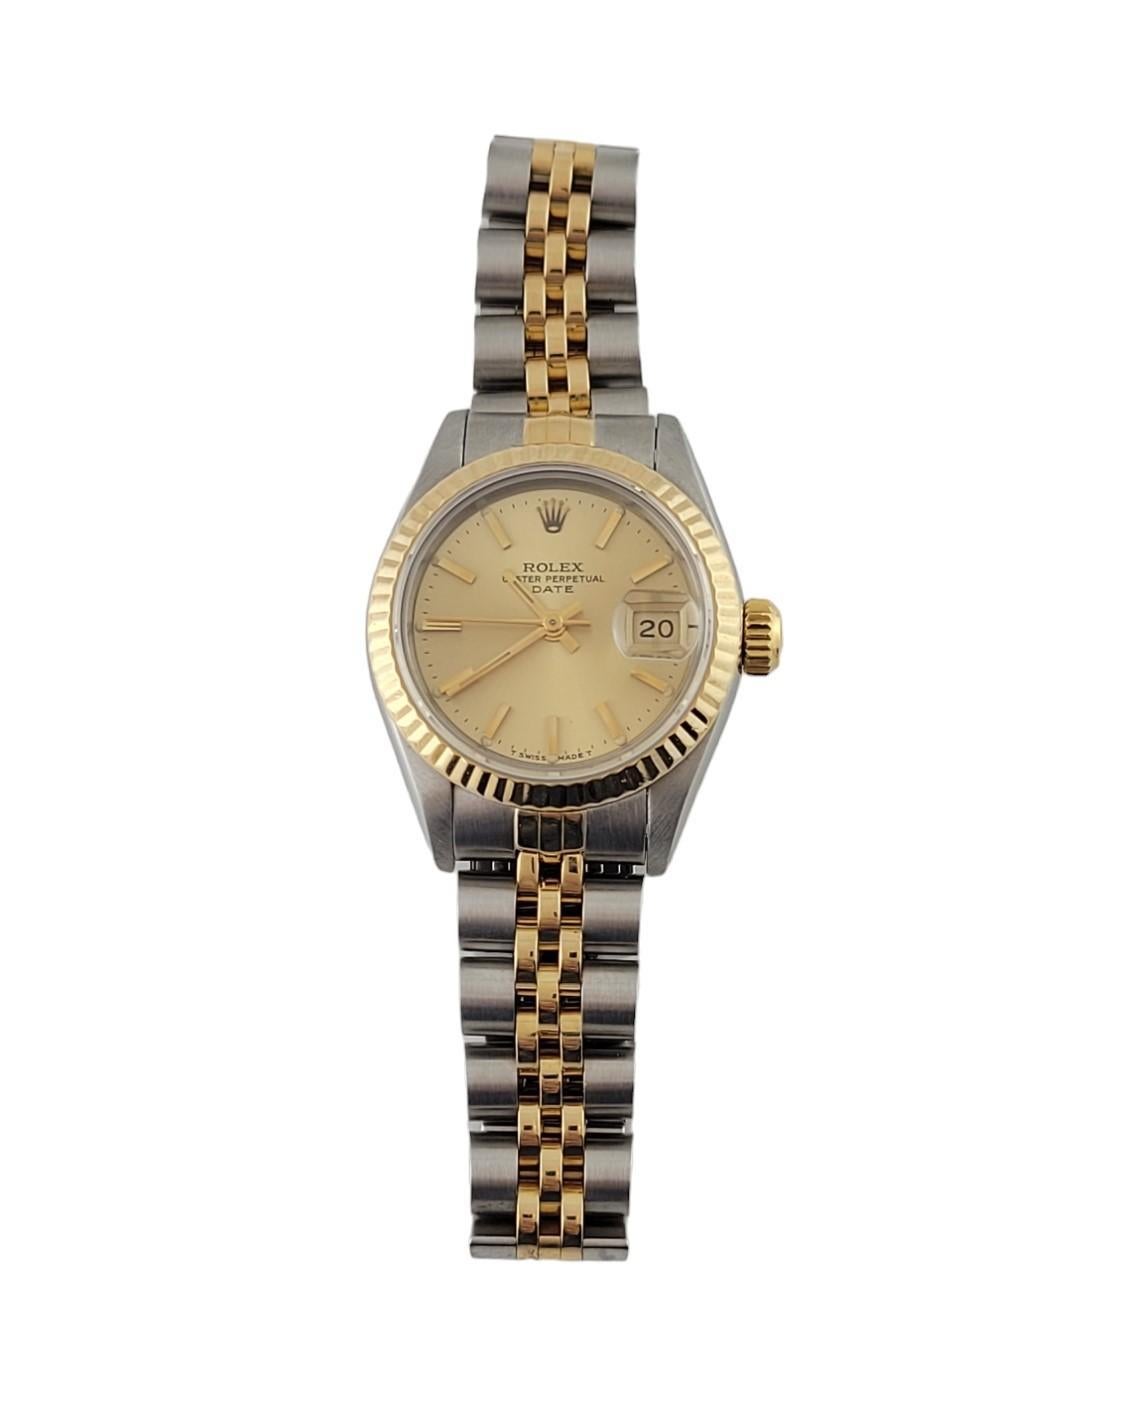 1984 Rolex Ladies Two Tone Watch 69173 Jubilee Band Gold Dial #17221 For Sale 6